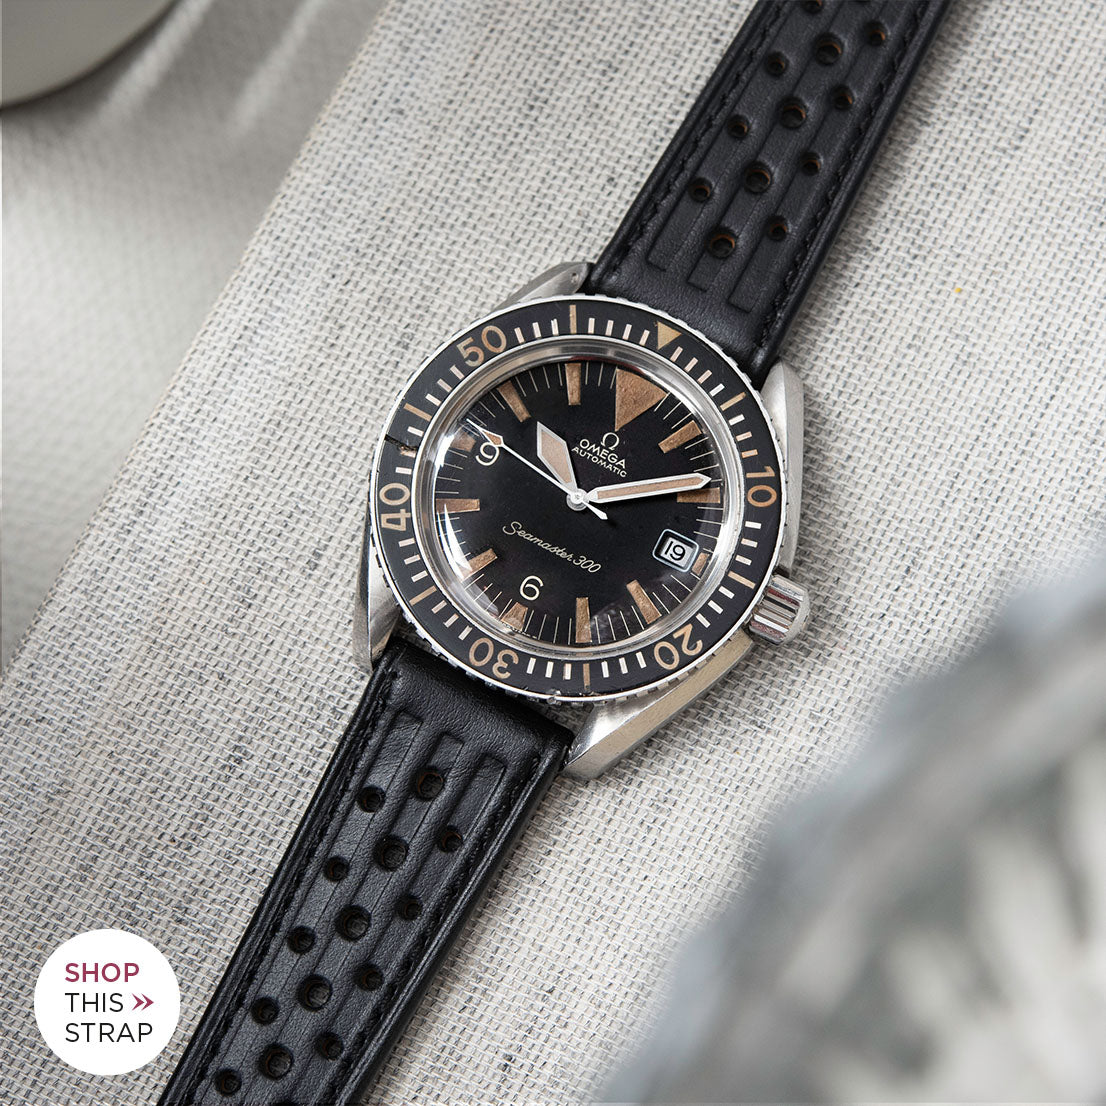 Bulang and Sons_Strap Guide_The omega SM 300 Seamaster_Racing Black Speedy Leather Watch Strap